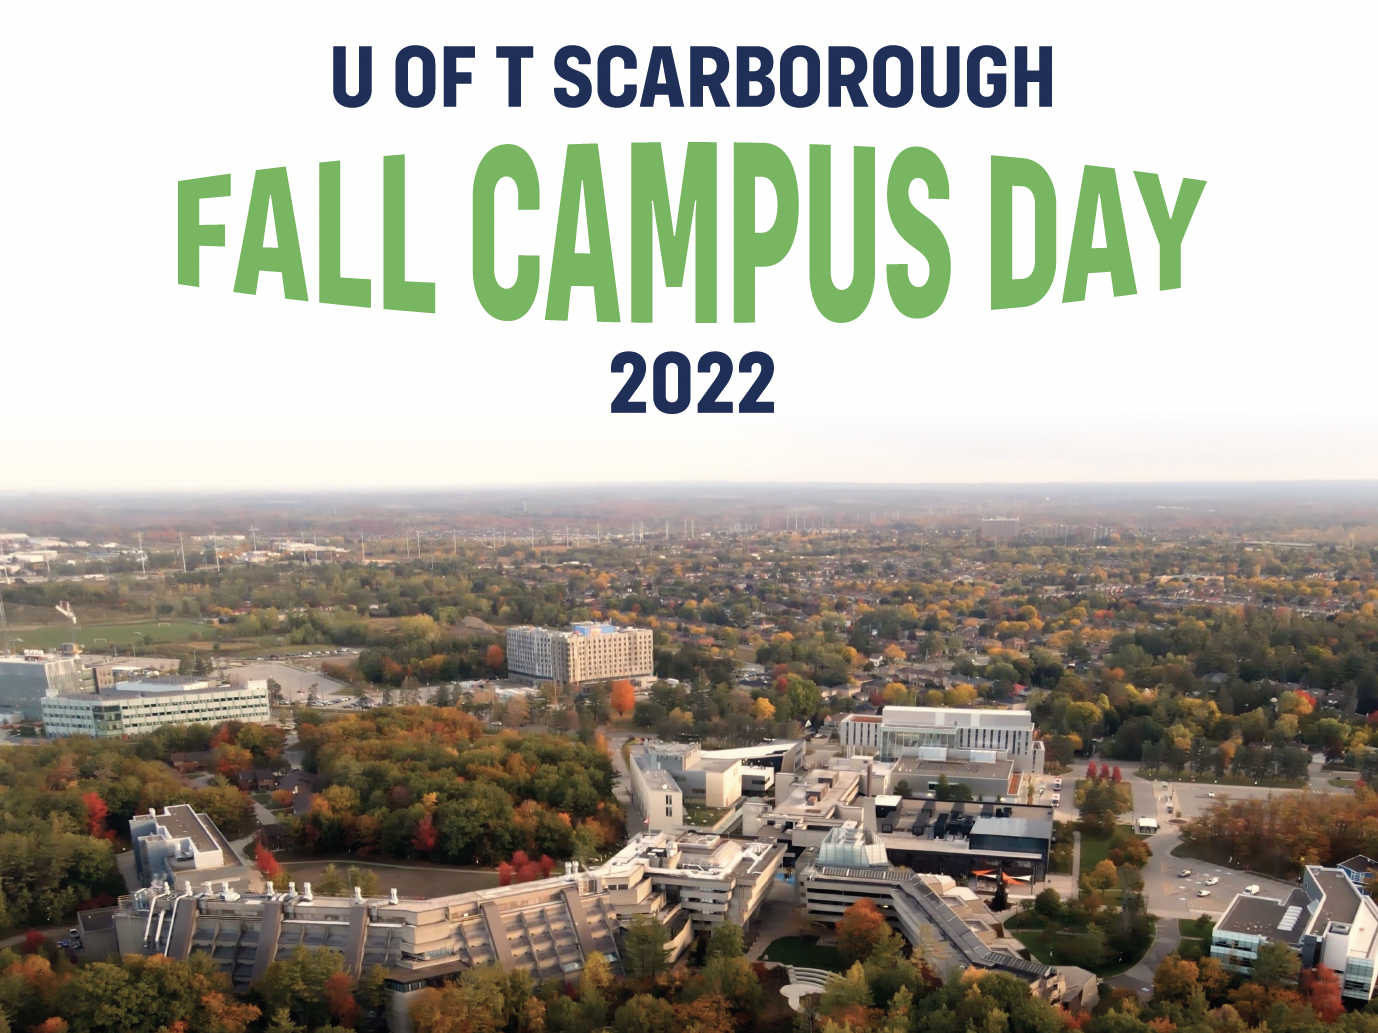 Fall Campus Day 2022 poster